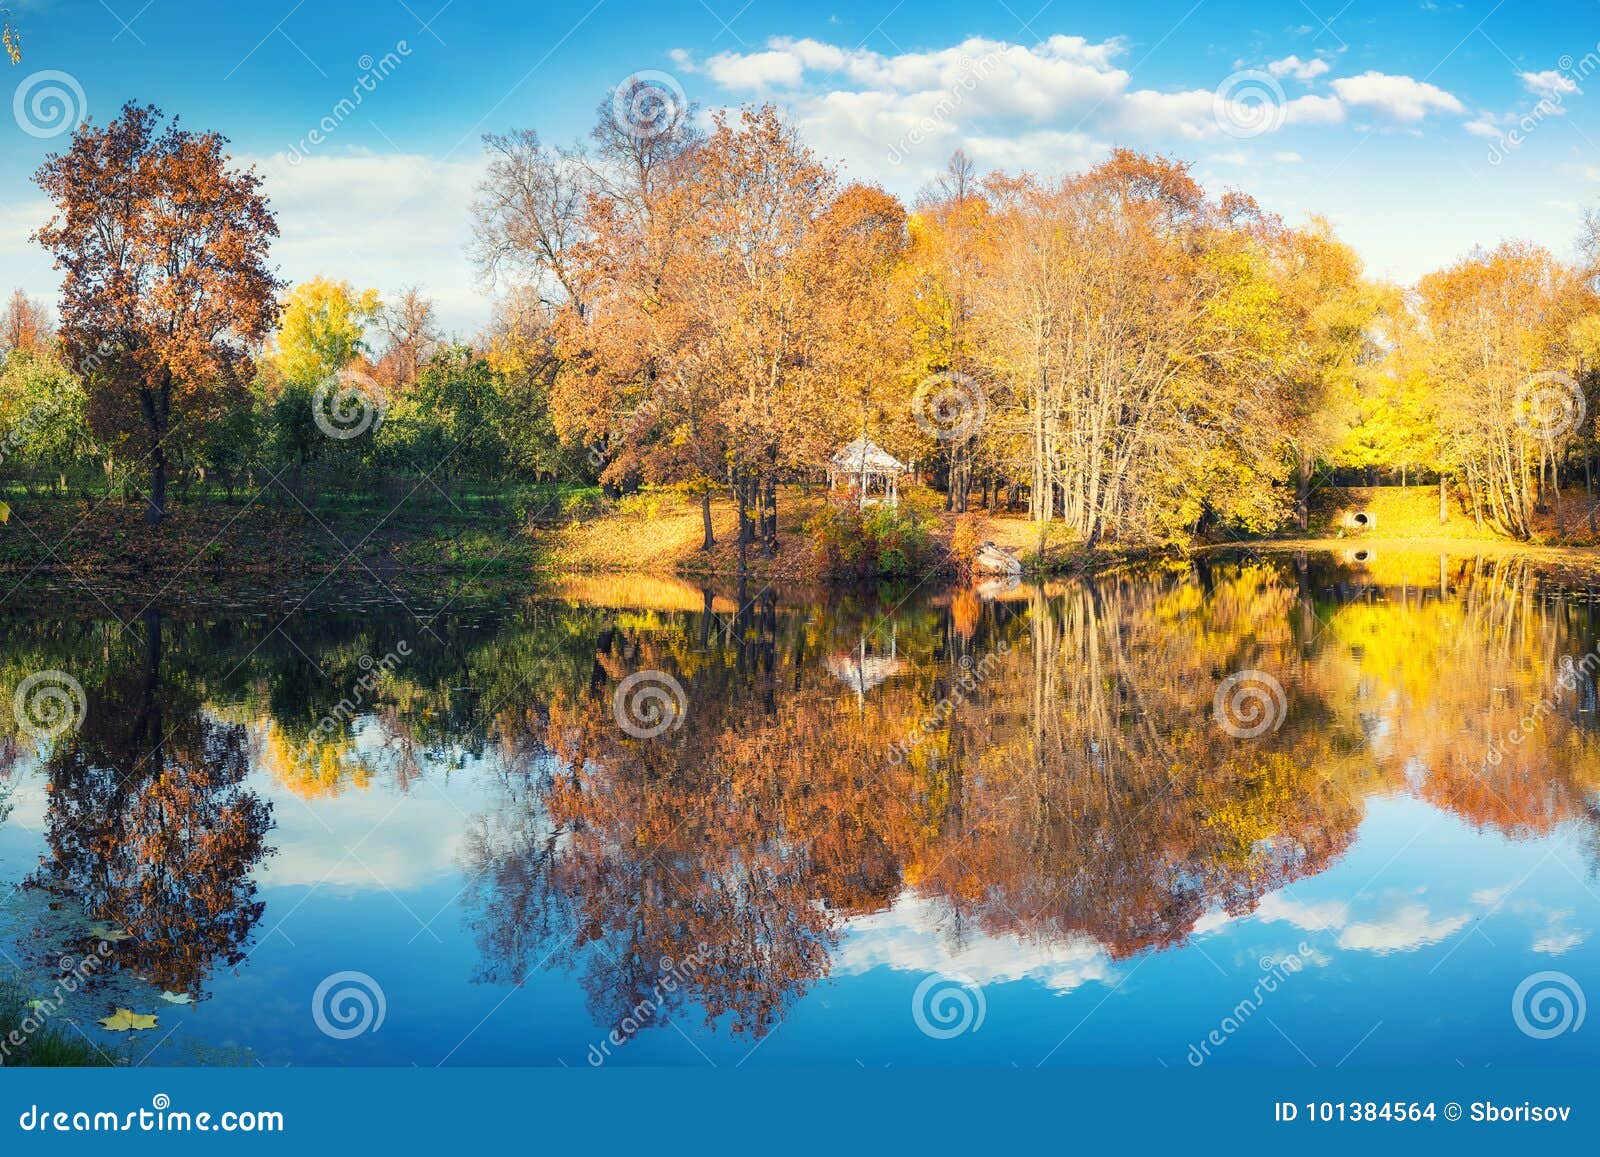 Sunny Autumn In The Park Over Lake Stock Photo Image Of Natural